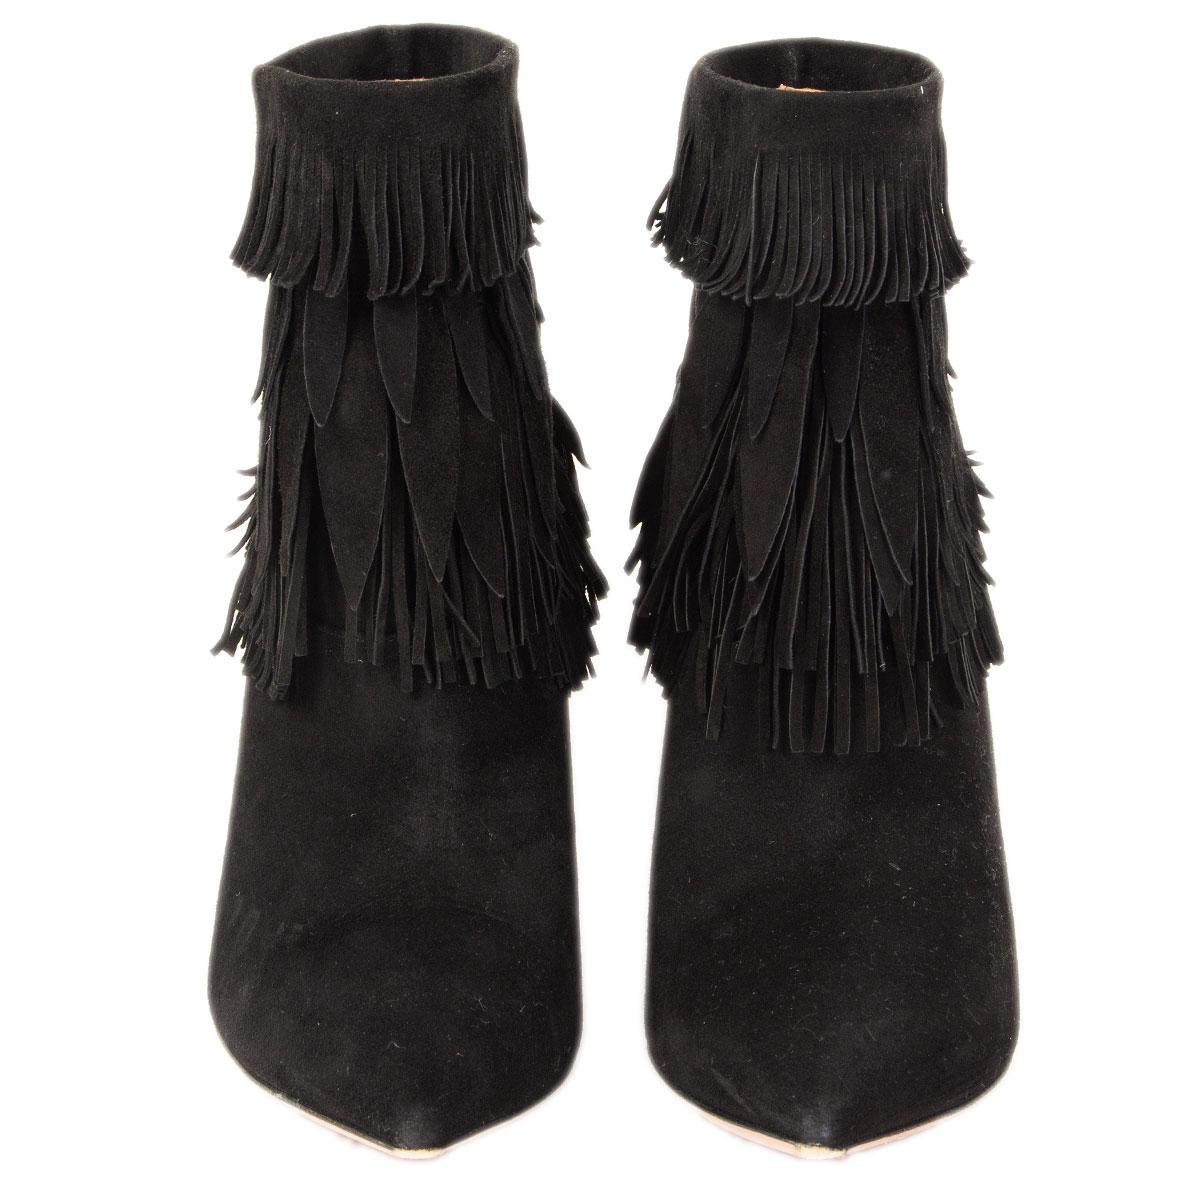 100% authentic Aquazzura Sasha fringed pointed-toe ankle-boots in black suede. Have been worn and are in excellent condition. 

Measurements
Imprinted Size	37.5
Shoe Size	37.5
Inside Sole	24cm (9.4in)
Width	7cm (2.7in)
Heel	8.5cm (3.3in)

All our